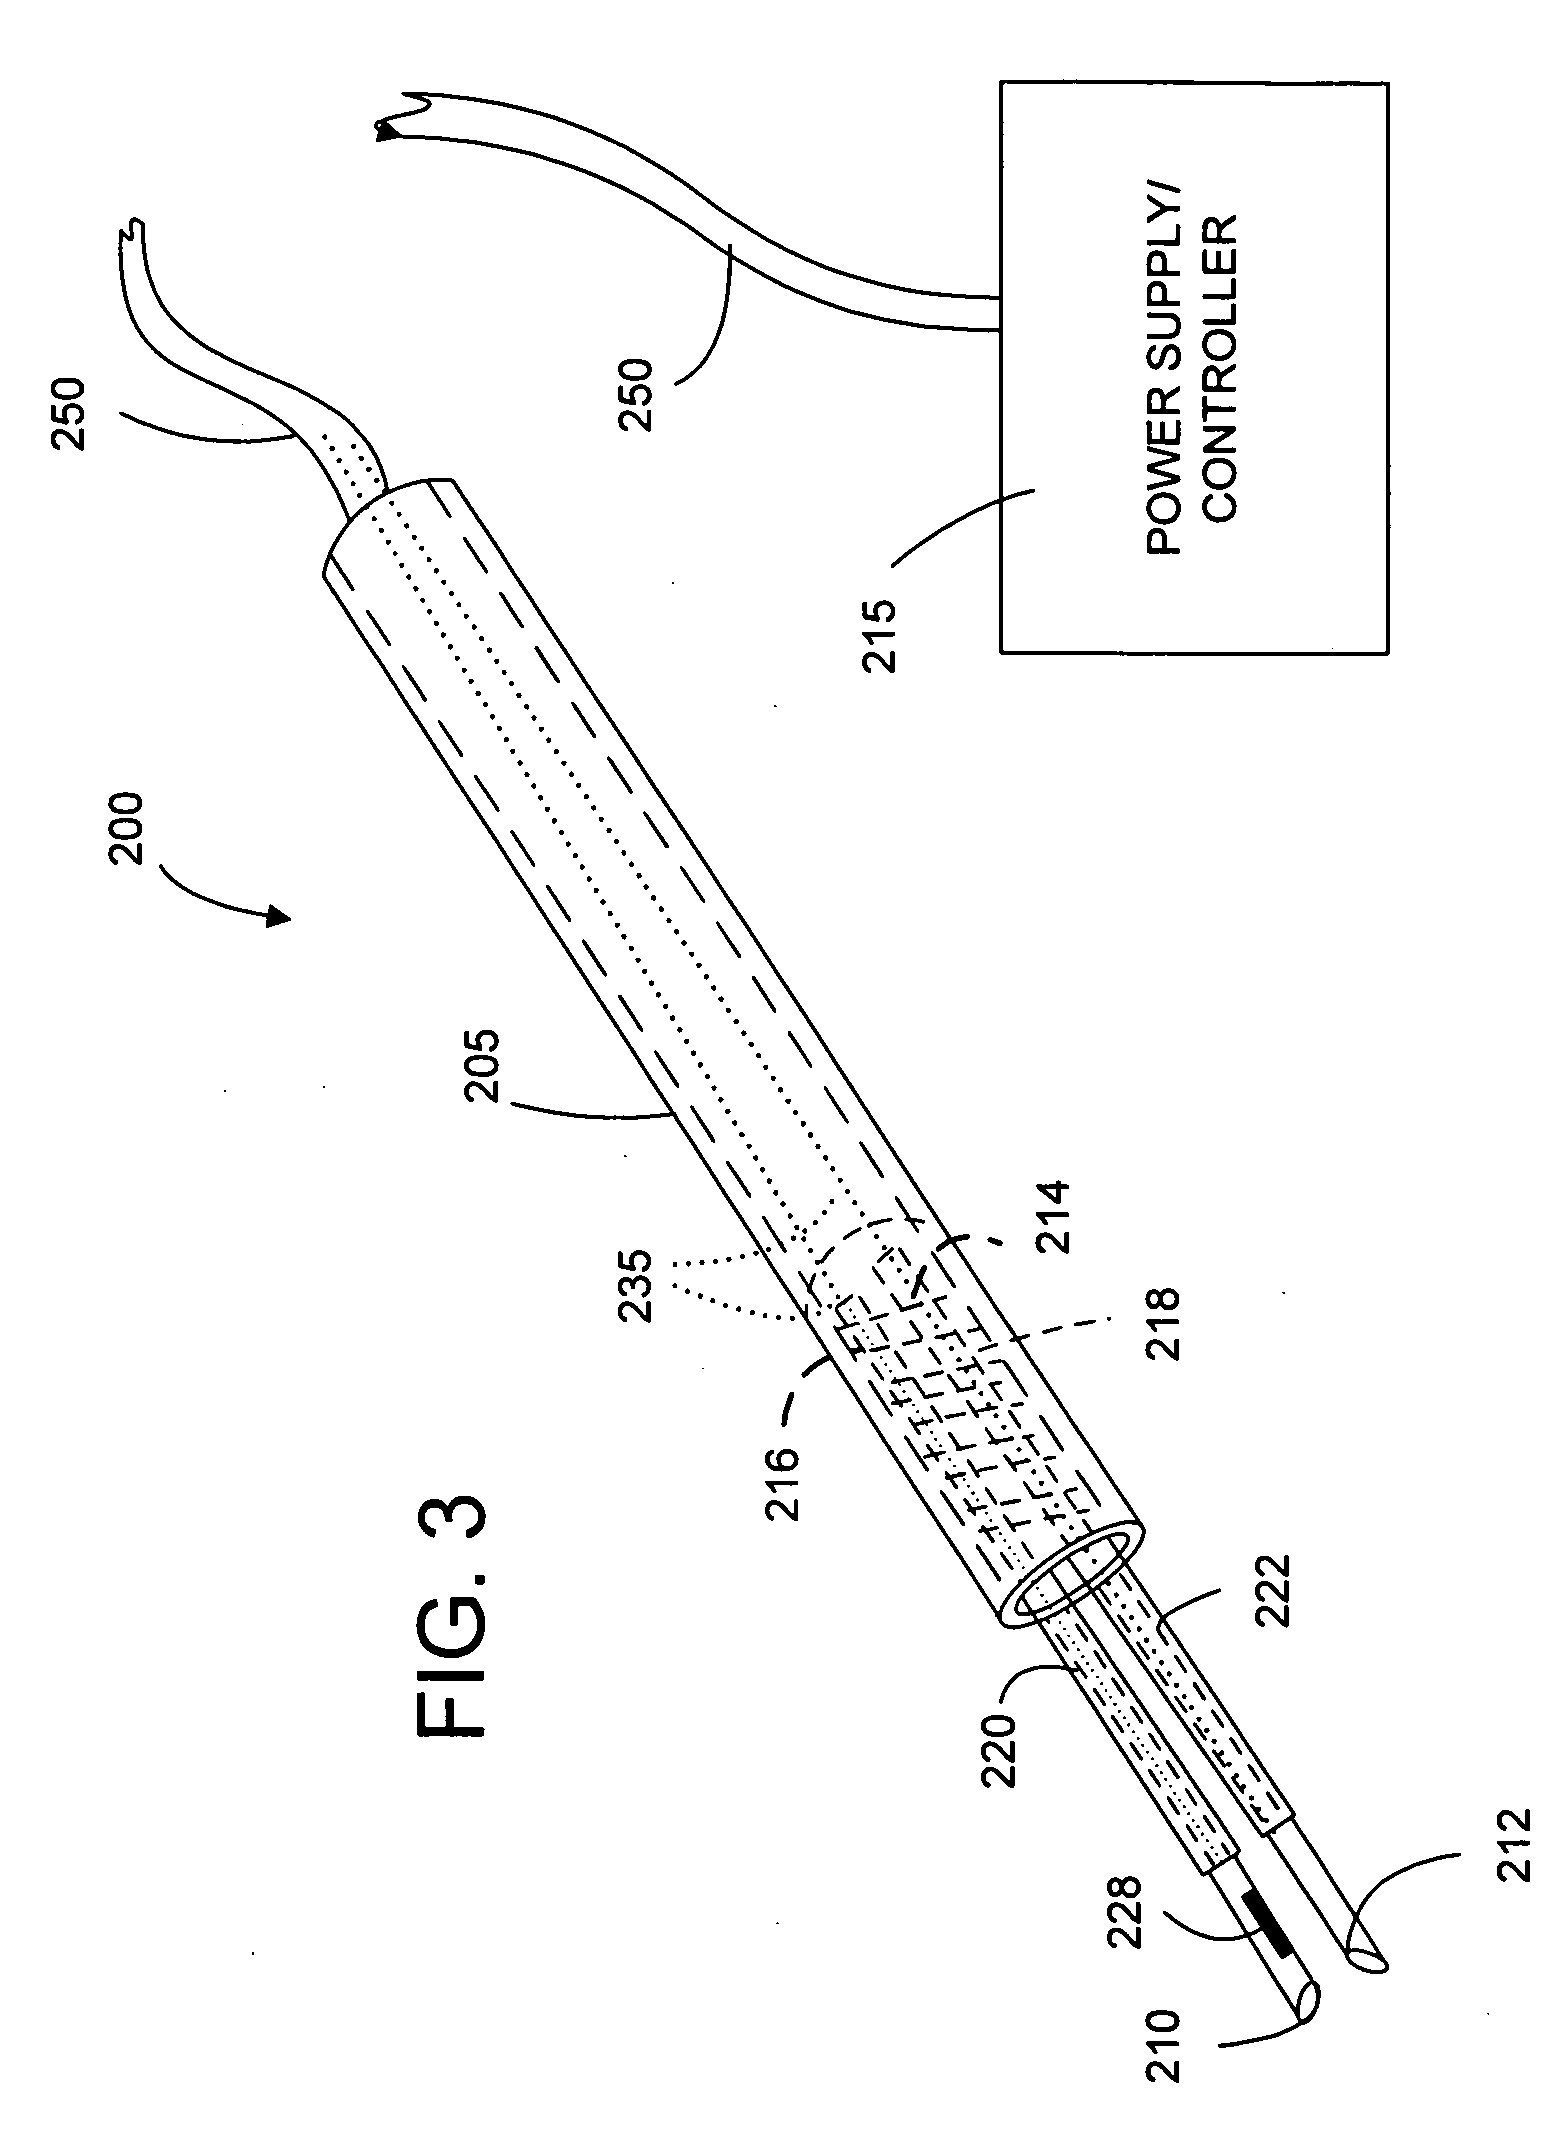 Method and device for less invasive surgical procedures on animals